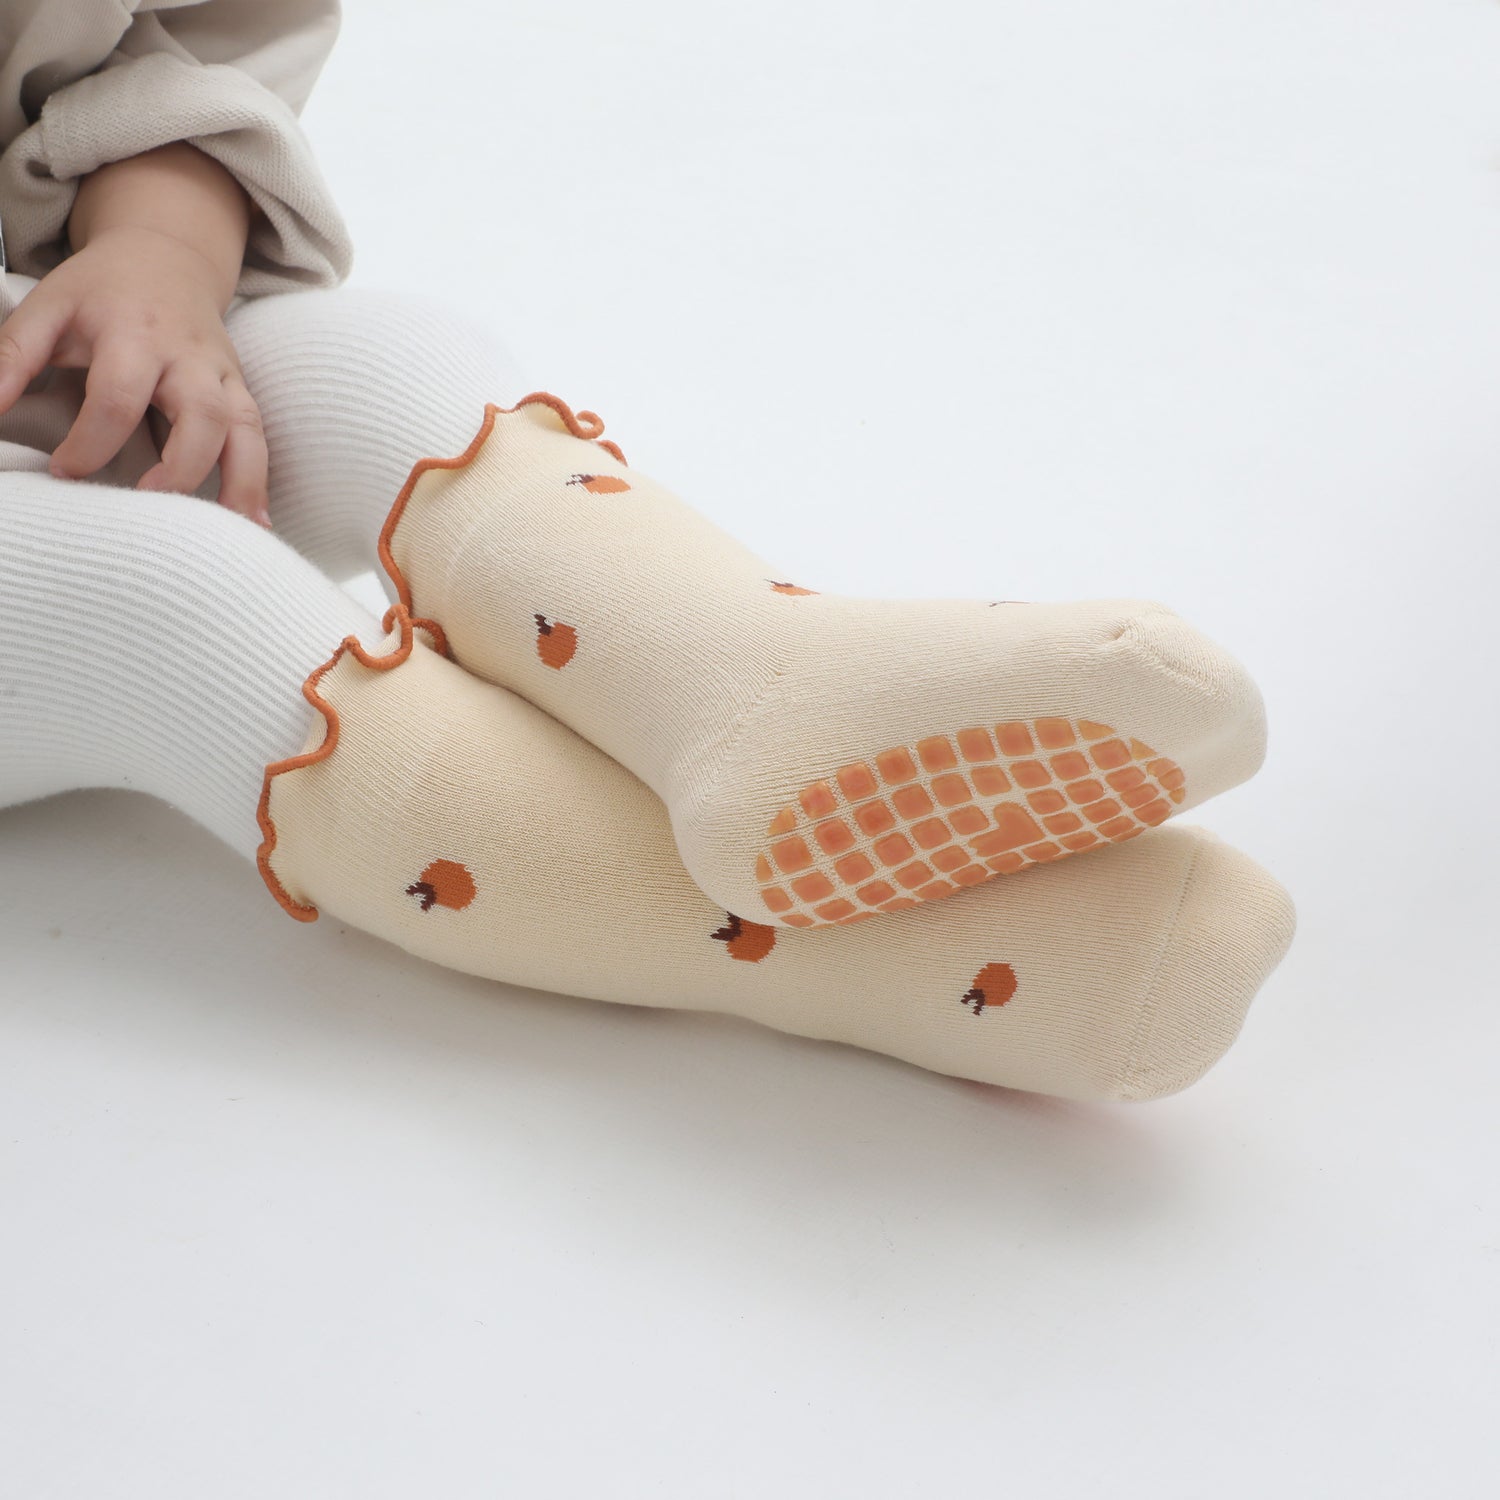 Fun grips on colorful kids' socks make for exciting and safe indoor adventures.